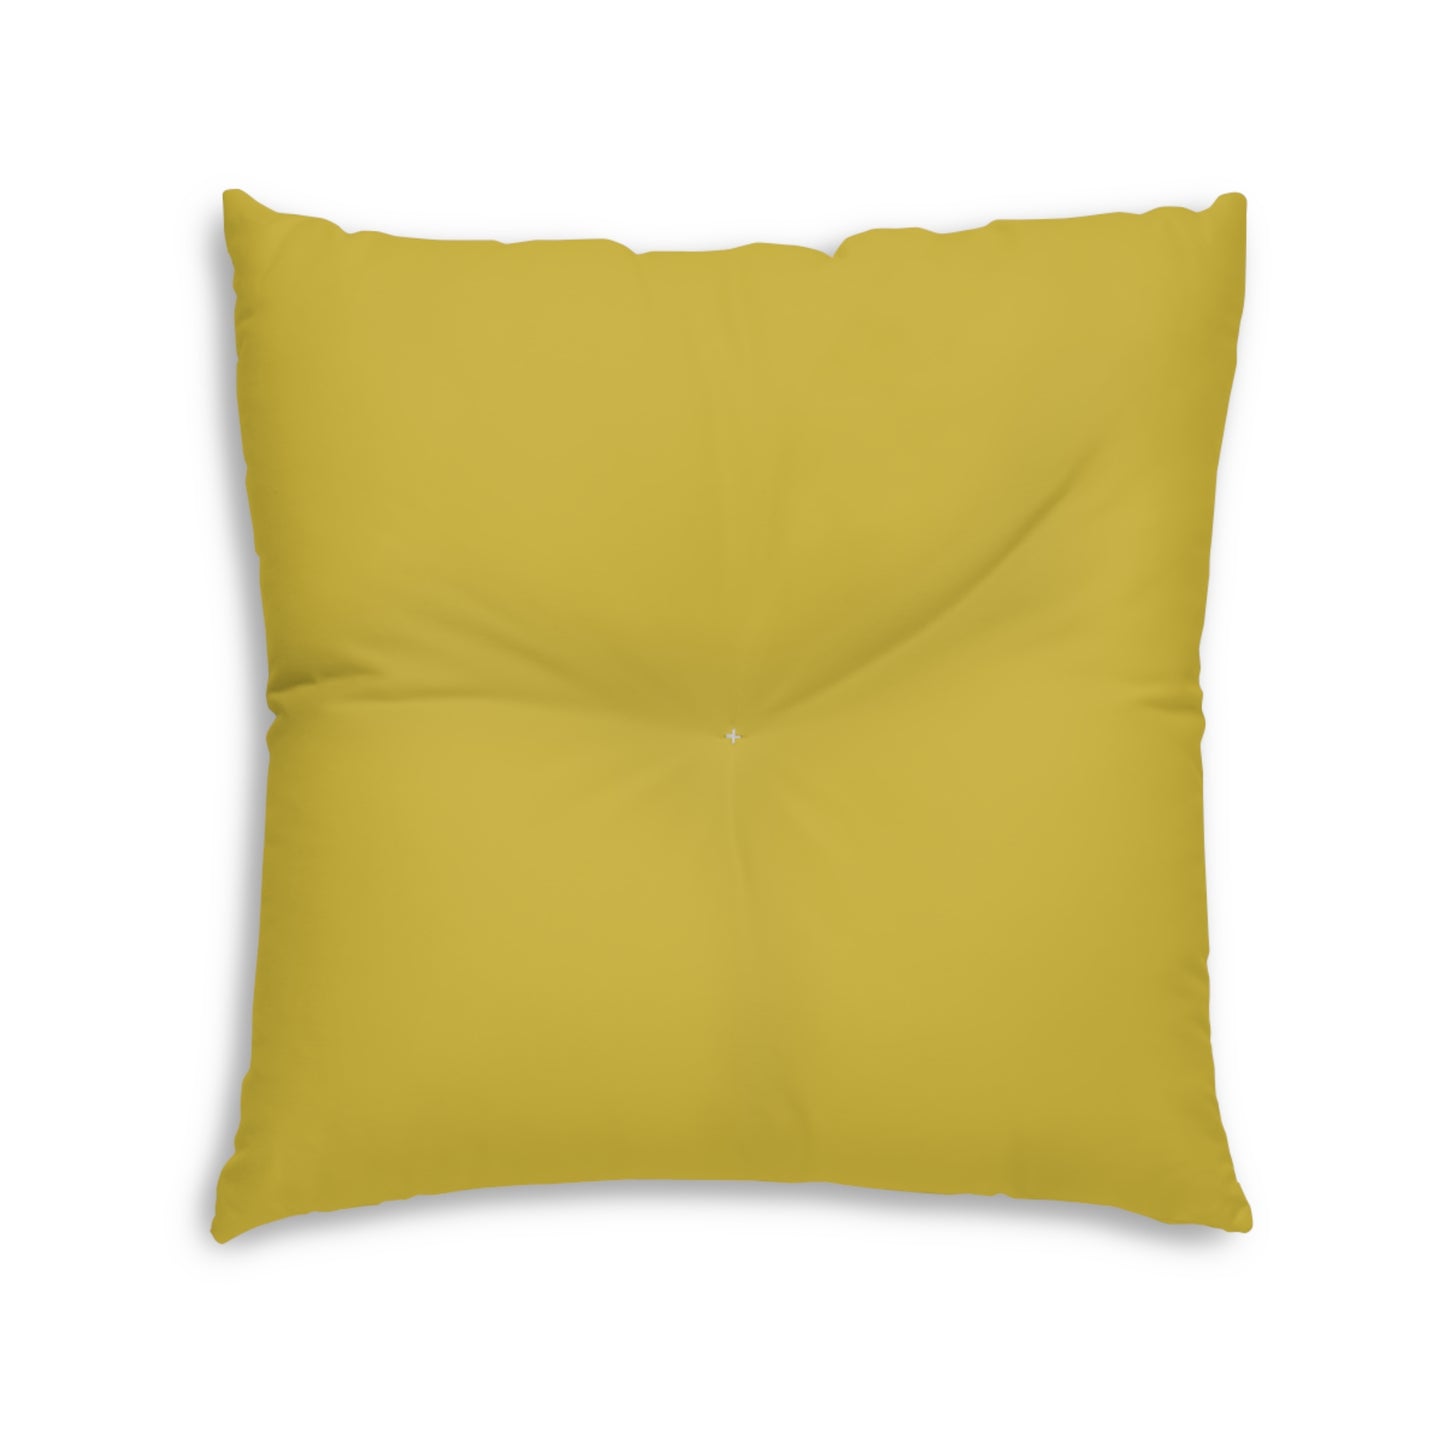 Golden Yellow Tufted  Square Floor Pillow with Star Illustration